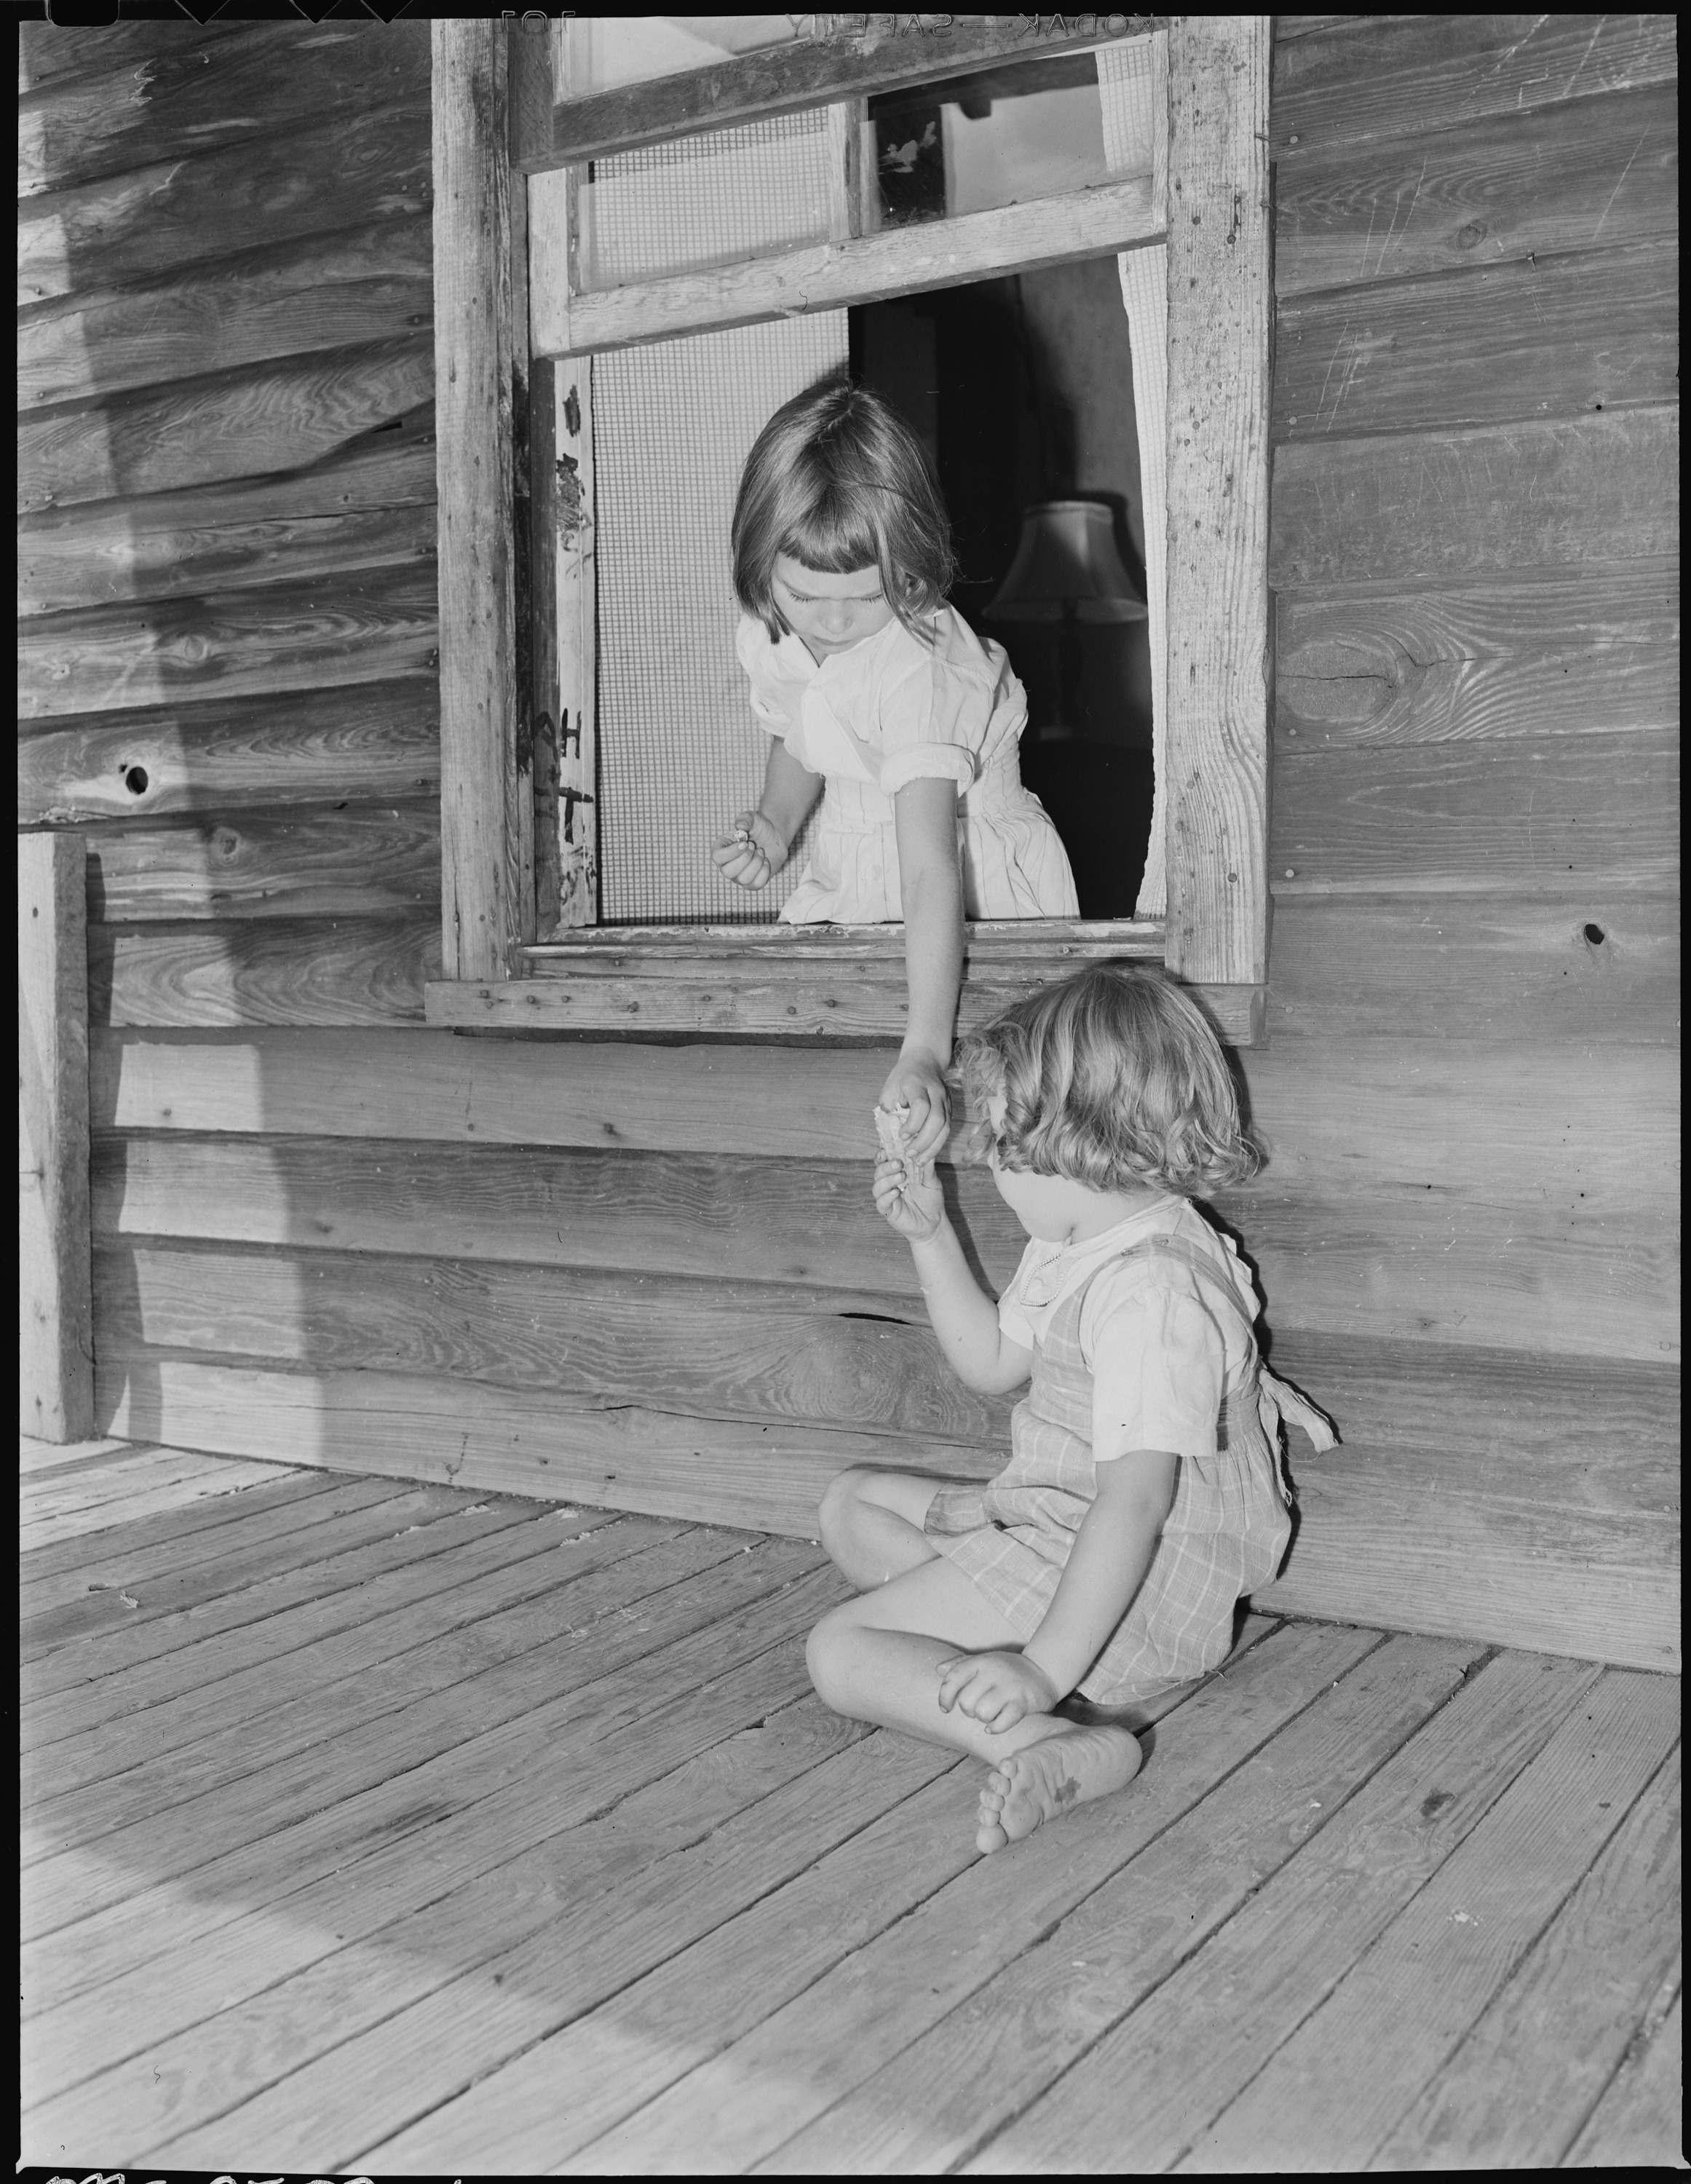 Wanda Lee Sergent hands her sister, Bobbie Jean, an ice cream cone through the window opening from the front porch to... - NARA - 541318